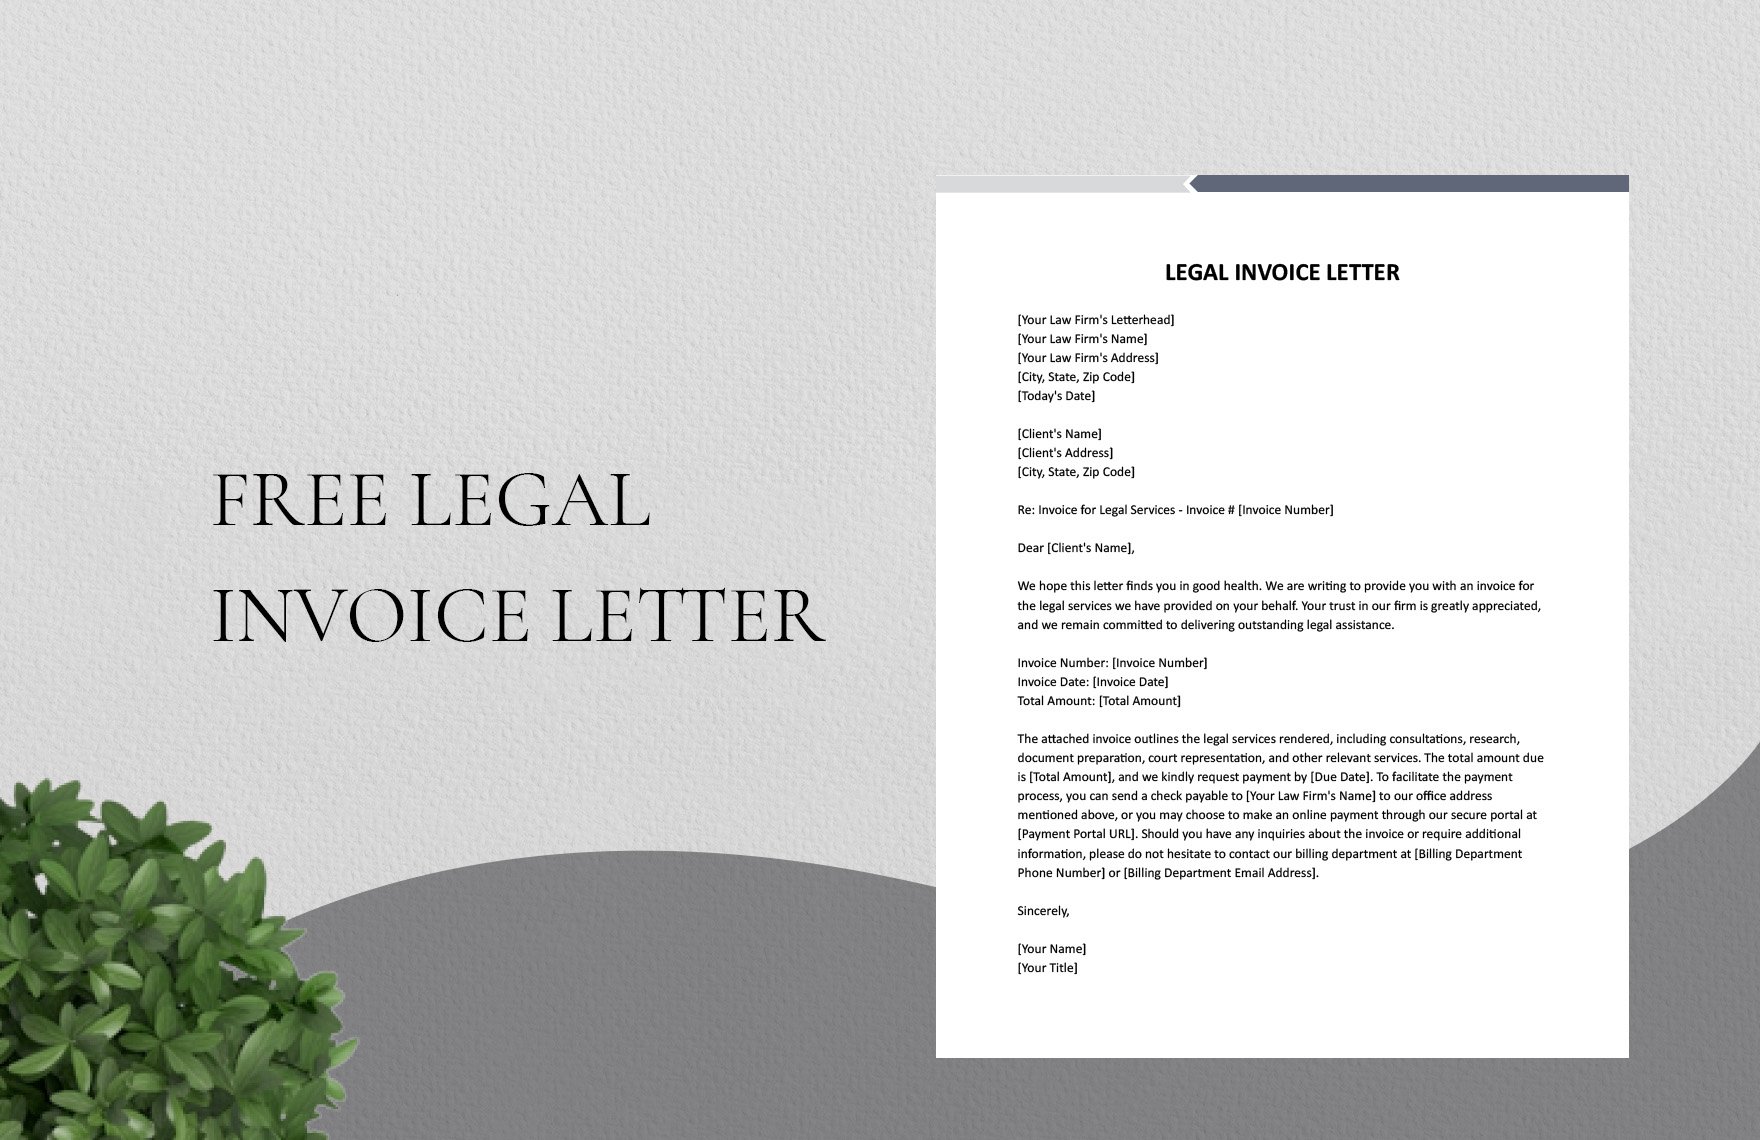 Legal Invoice Letter in Word, Google Docs